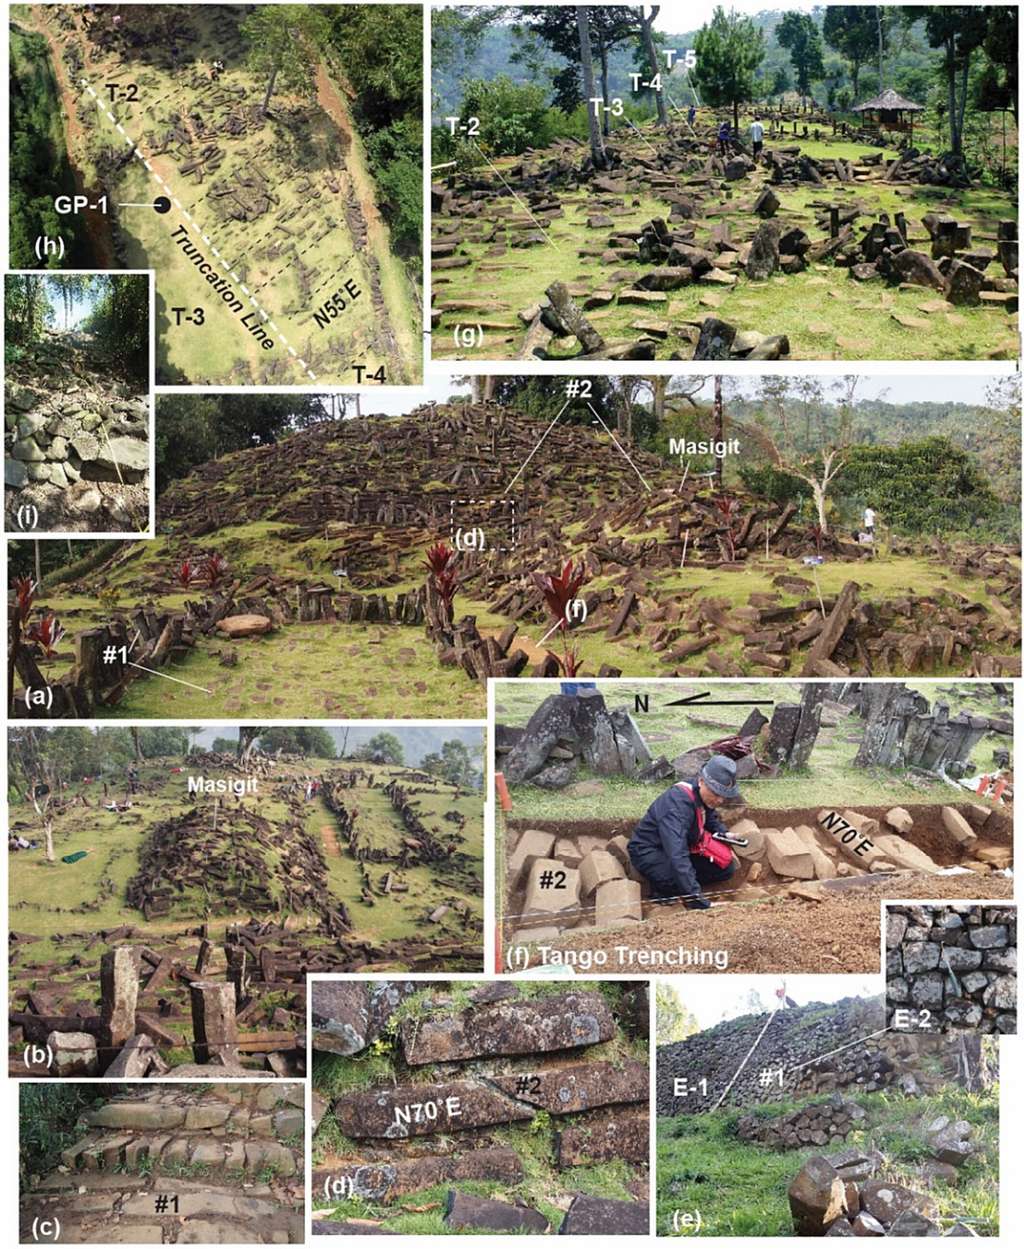 The surface of Gunung Padang is covered in deliberately placed megaliths.